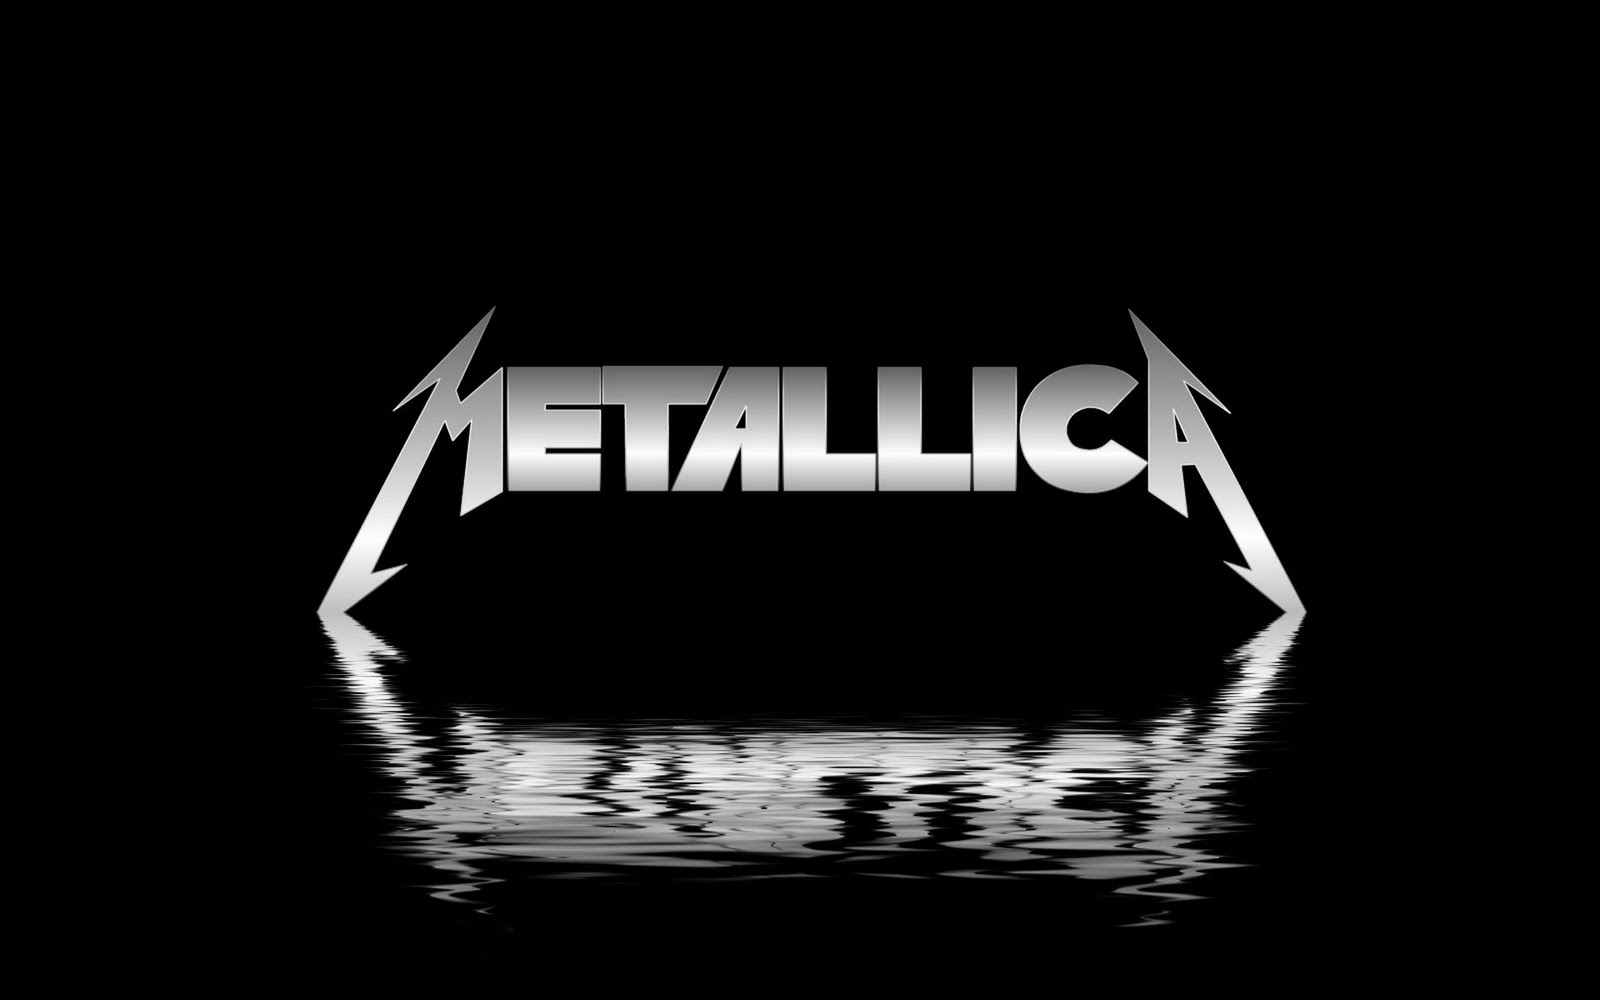 Metallica the Greatest rock band of all times, 2011 free download wallpapers